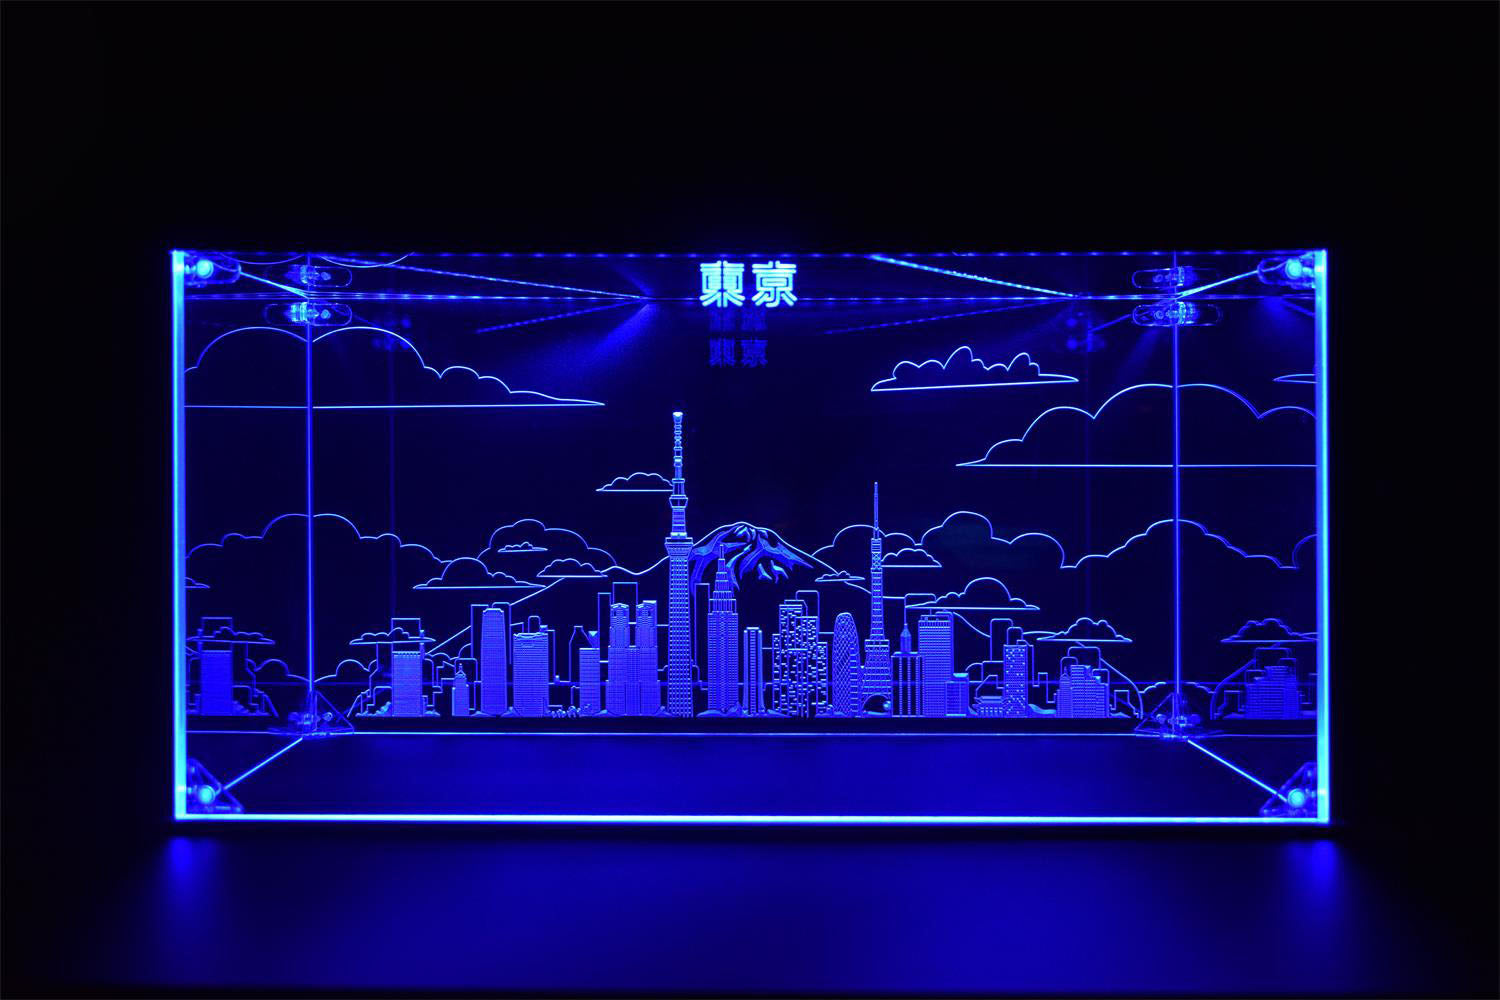 Tokyo Skyline LED Display Case for Diecast Scale Cars, Lego, Action Figures